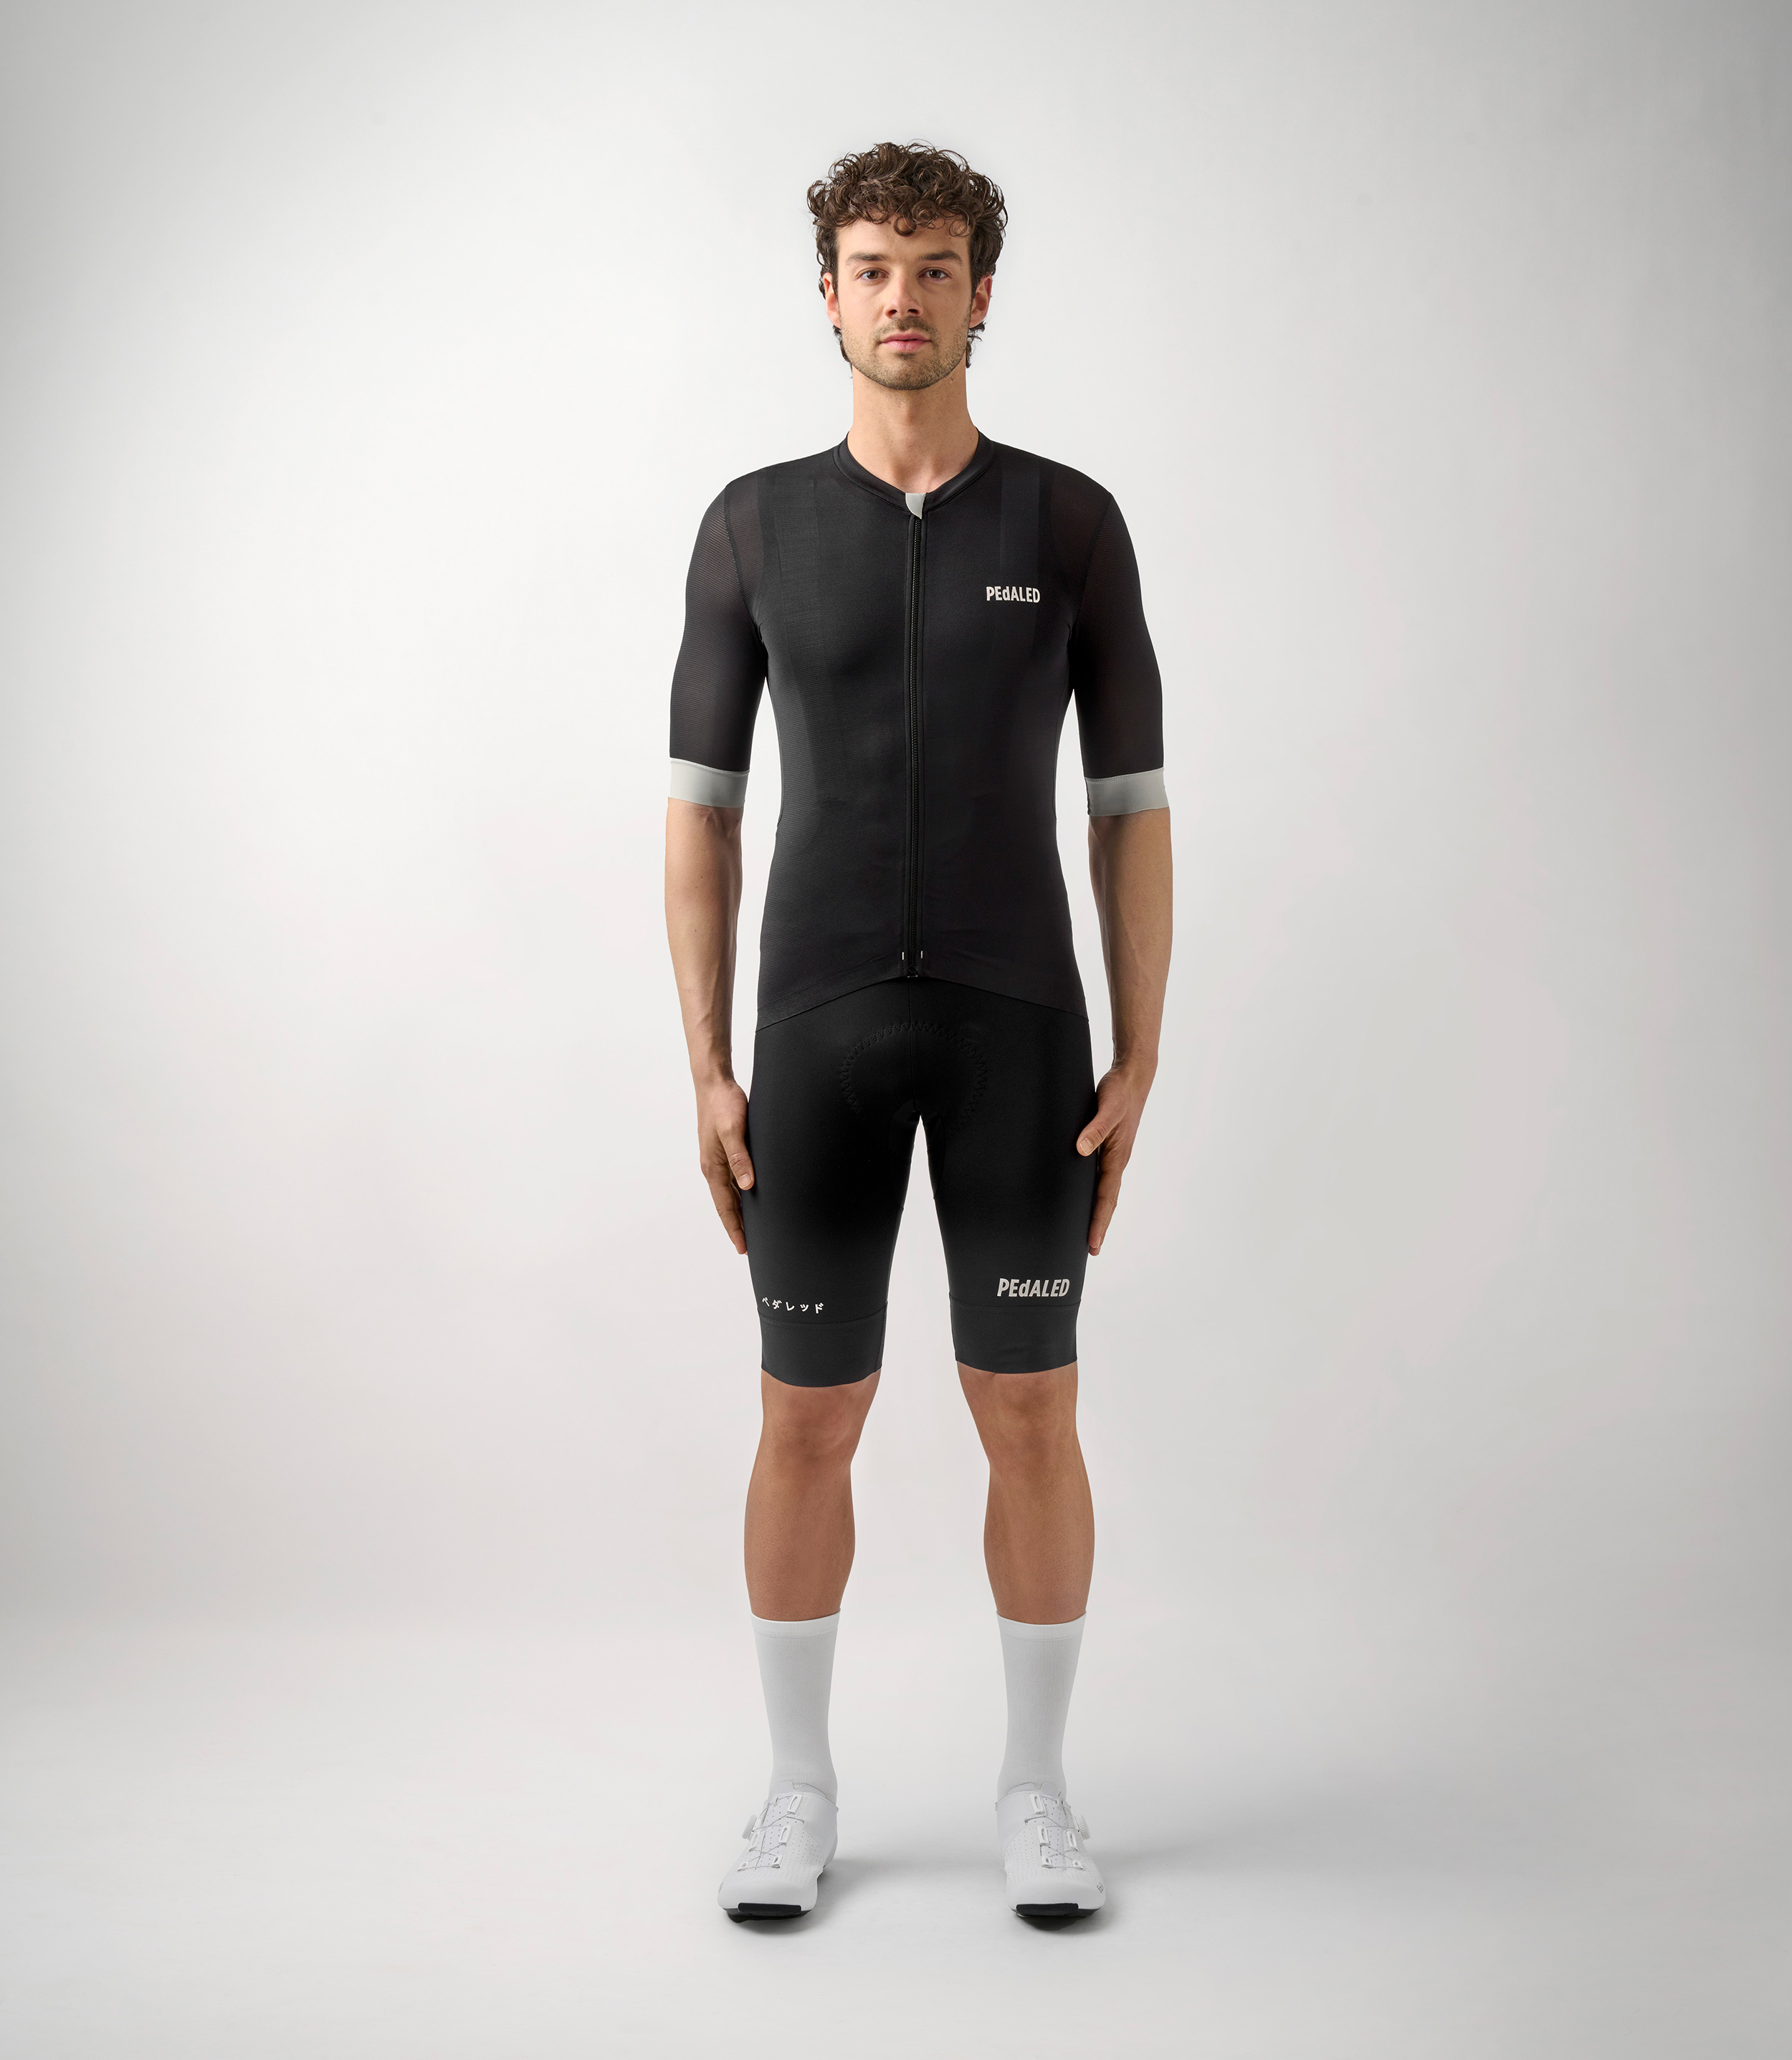 Short Sleeve Road Cycling Jersey Black for Men | PEdALED